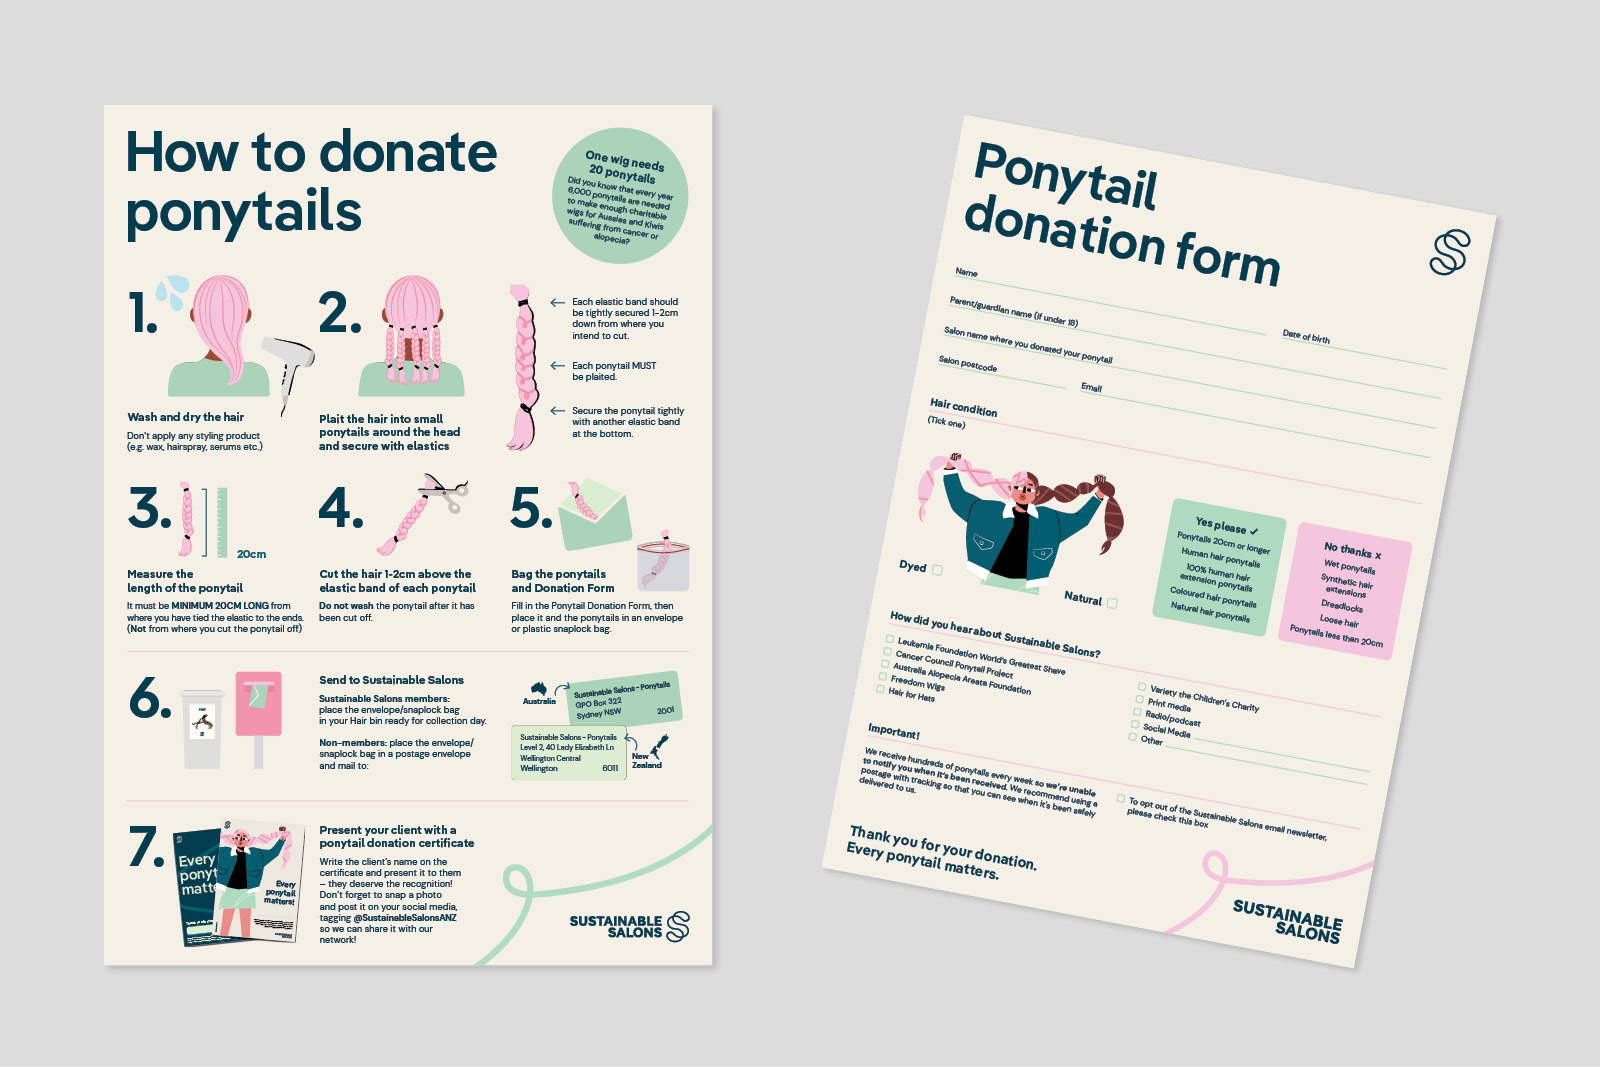 A mockup of what the front and back sides of a ponytail donation form looks like for Sustainable salons.